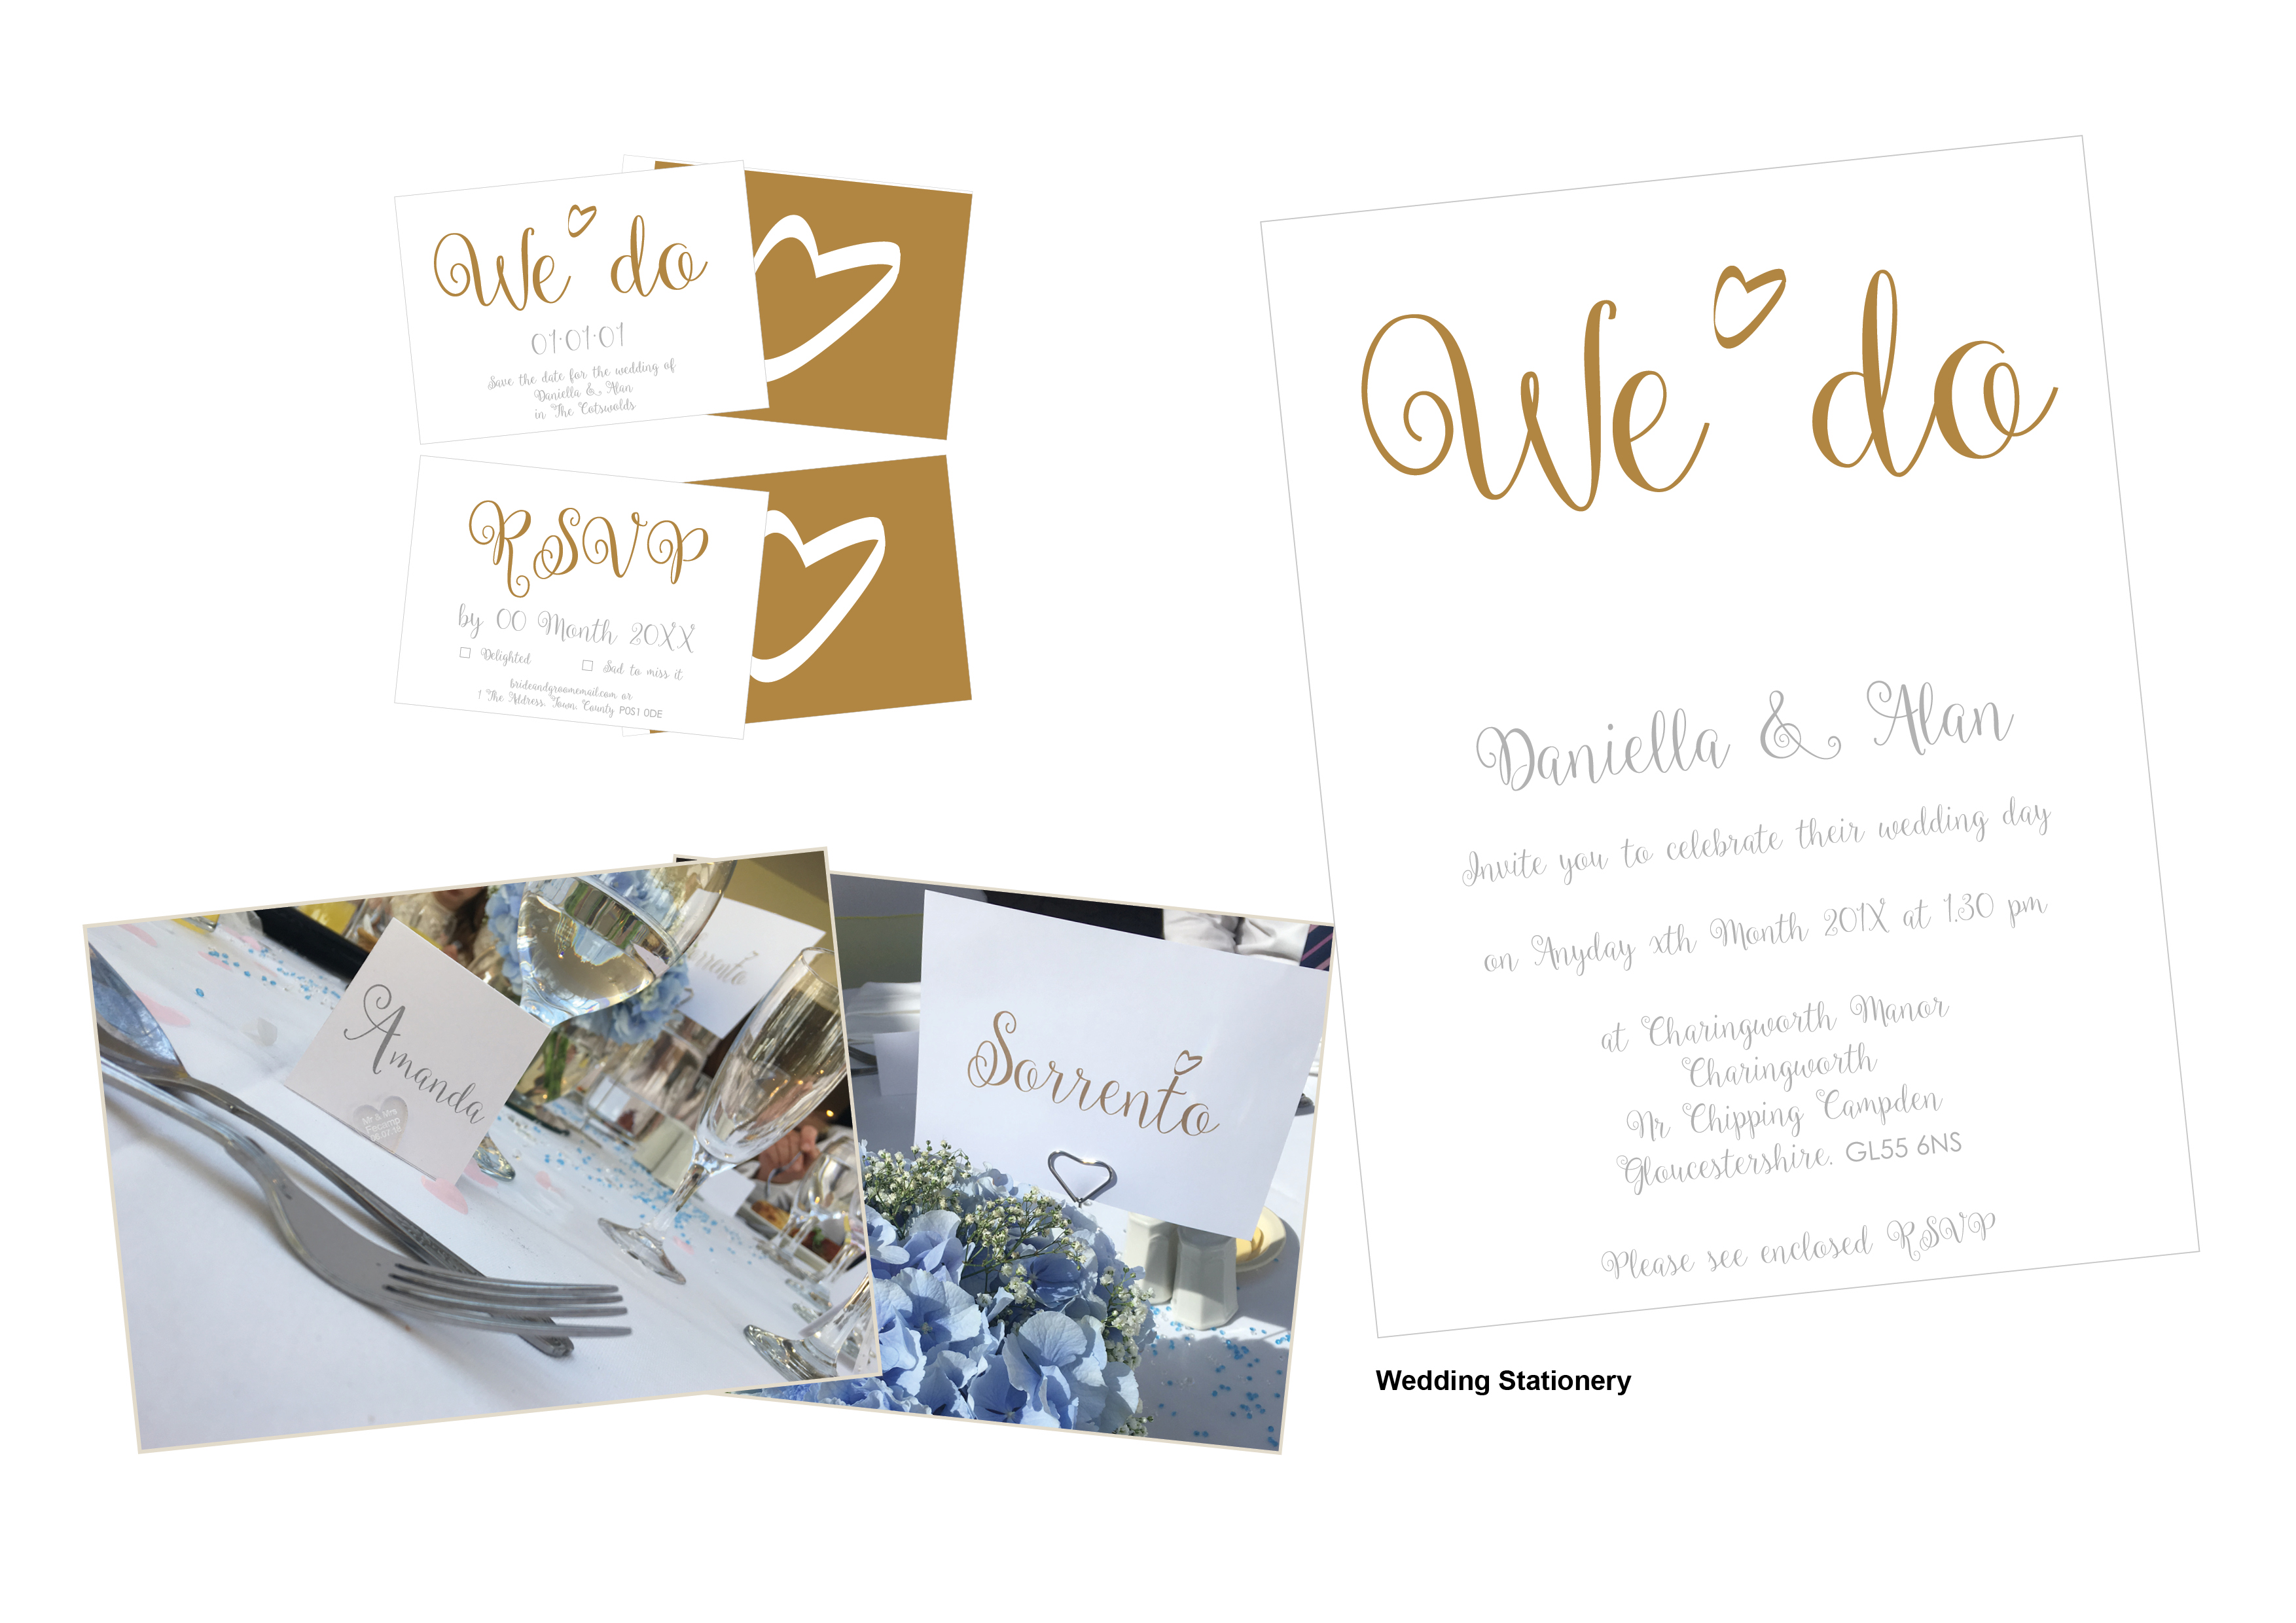 Wedding Invitations, Save the Date, RSVP Cards, Memories Banner, Place Cards, Table Name signs, Table Plan